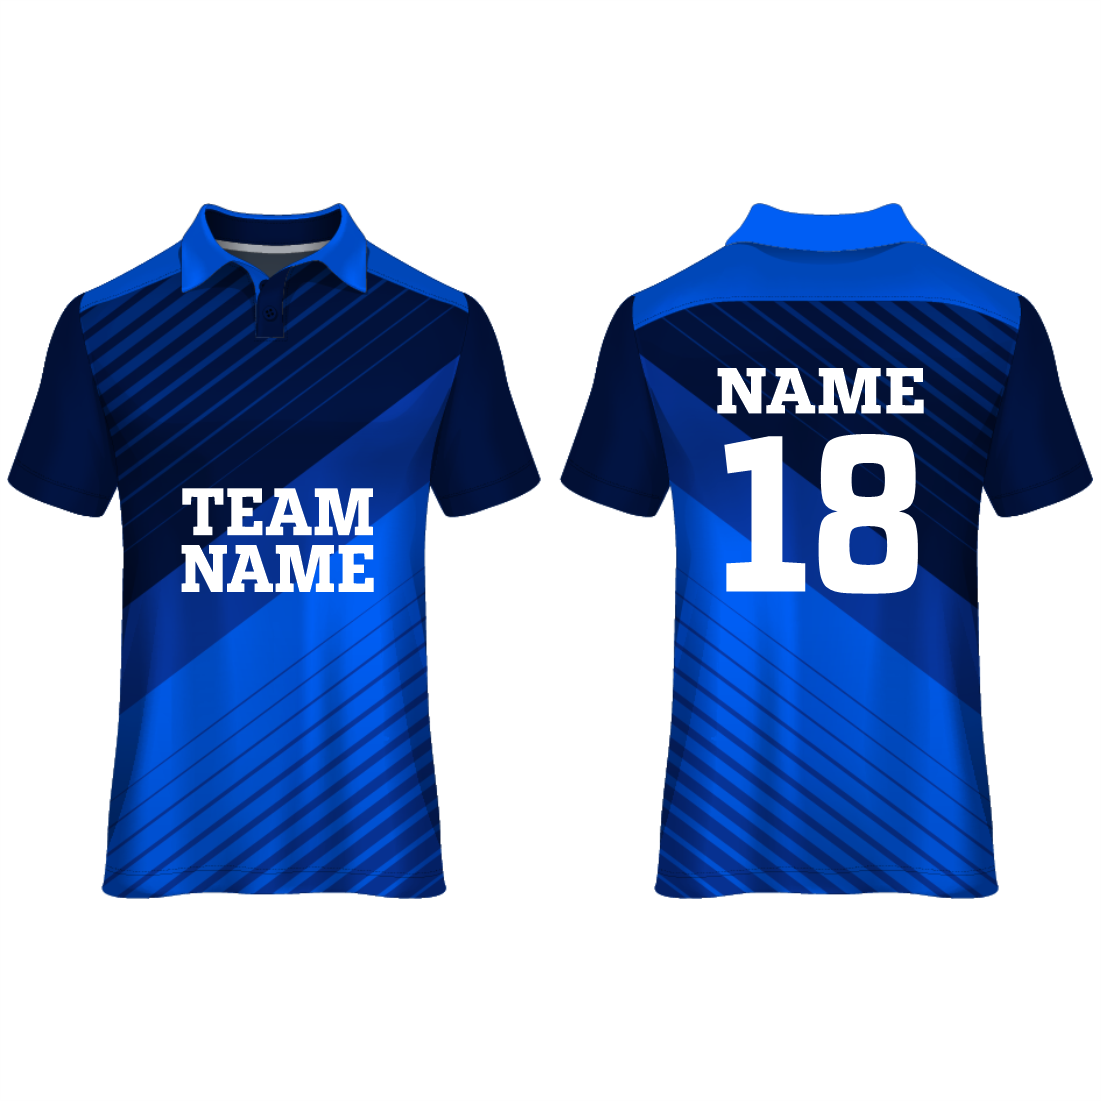 NEXT PRINT All Over Printed Customized Sublimation T-Shirt Unisex Sports Jersey Player Name & Number, Team Name.1158606331